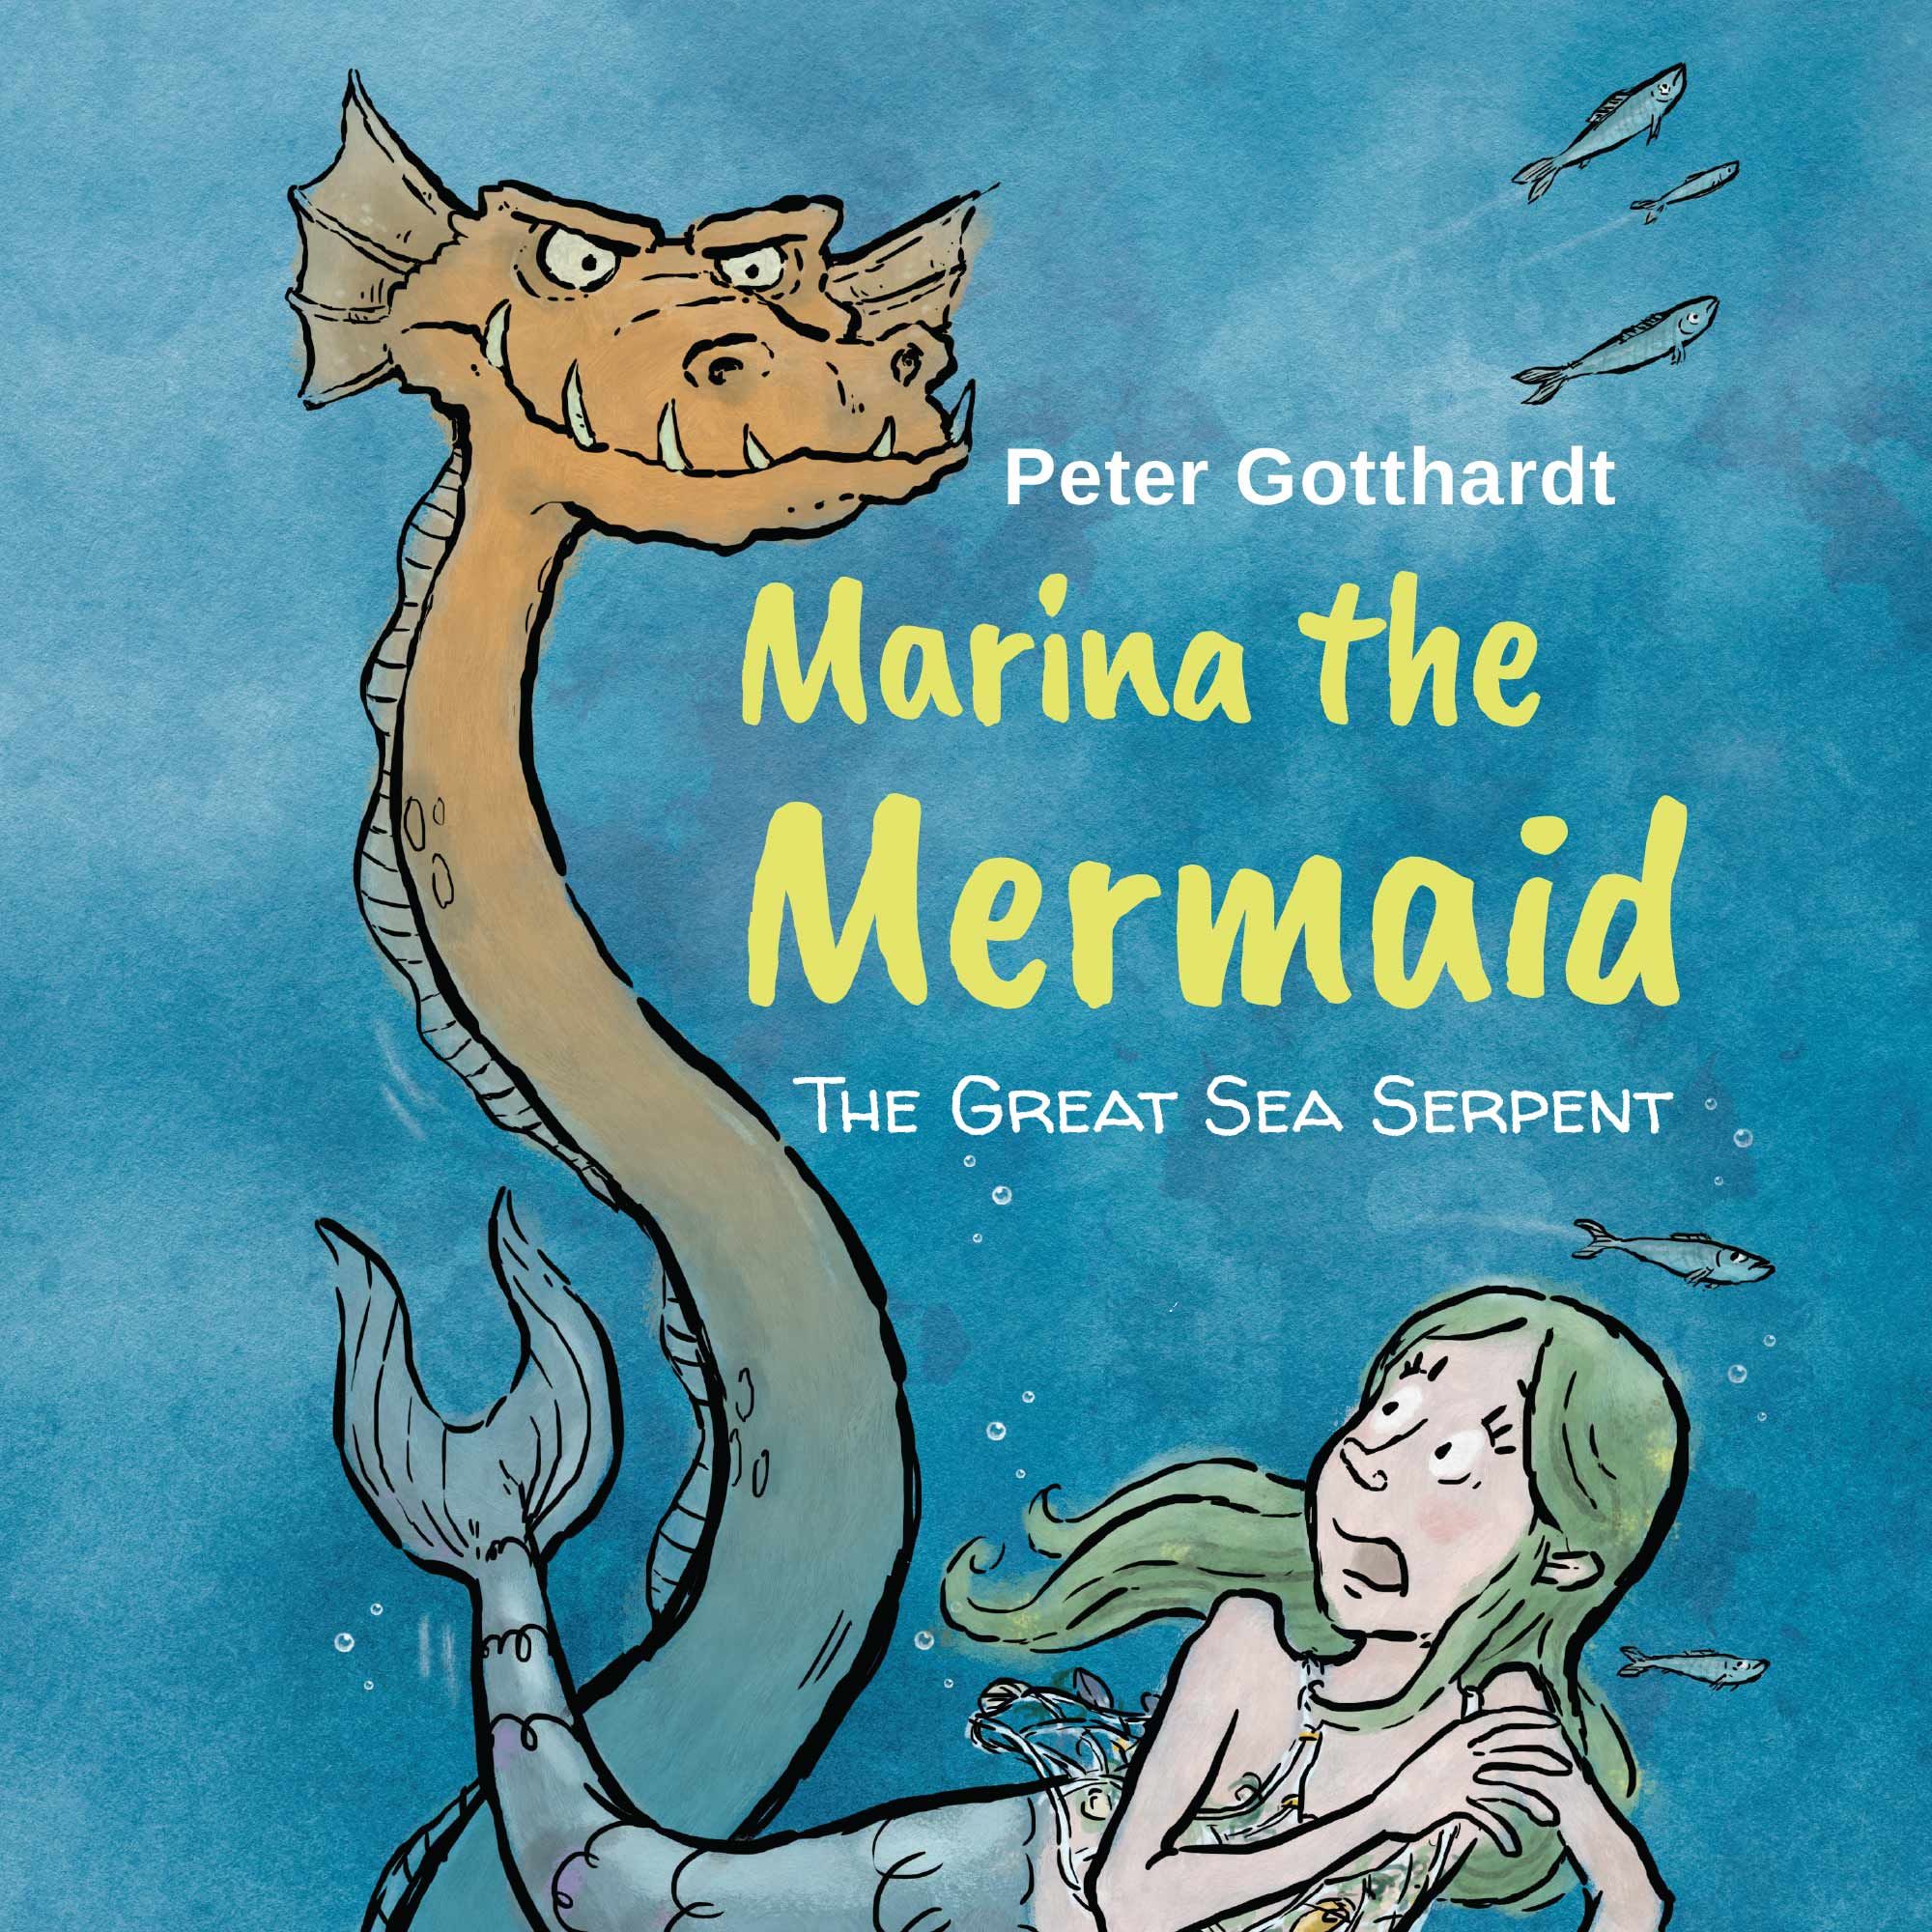 Marina the Mermaid #2: The Great Sea Serpent, audiobook by Peter Gotthardt